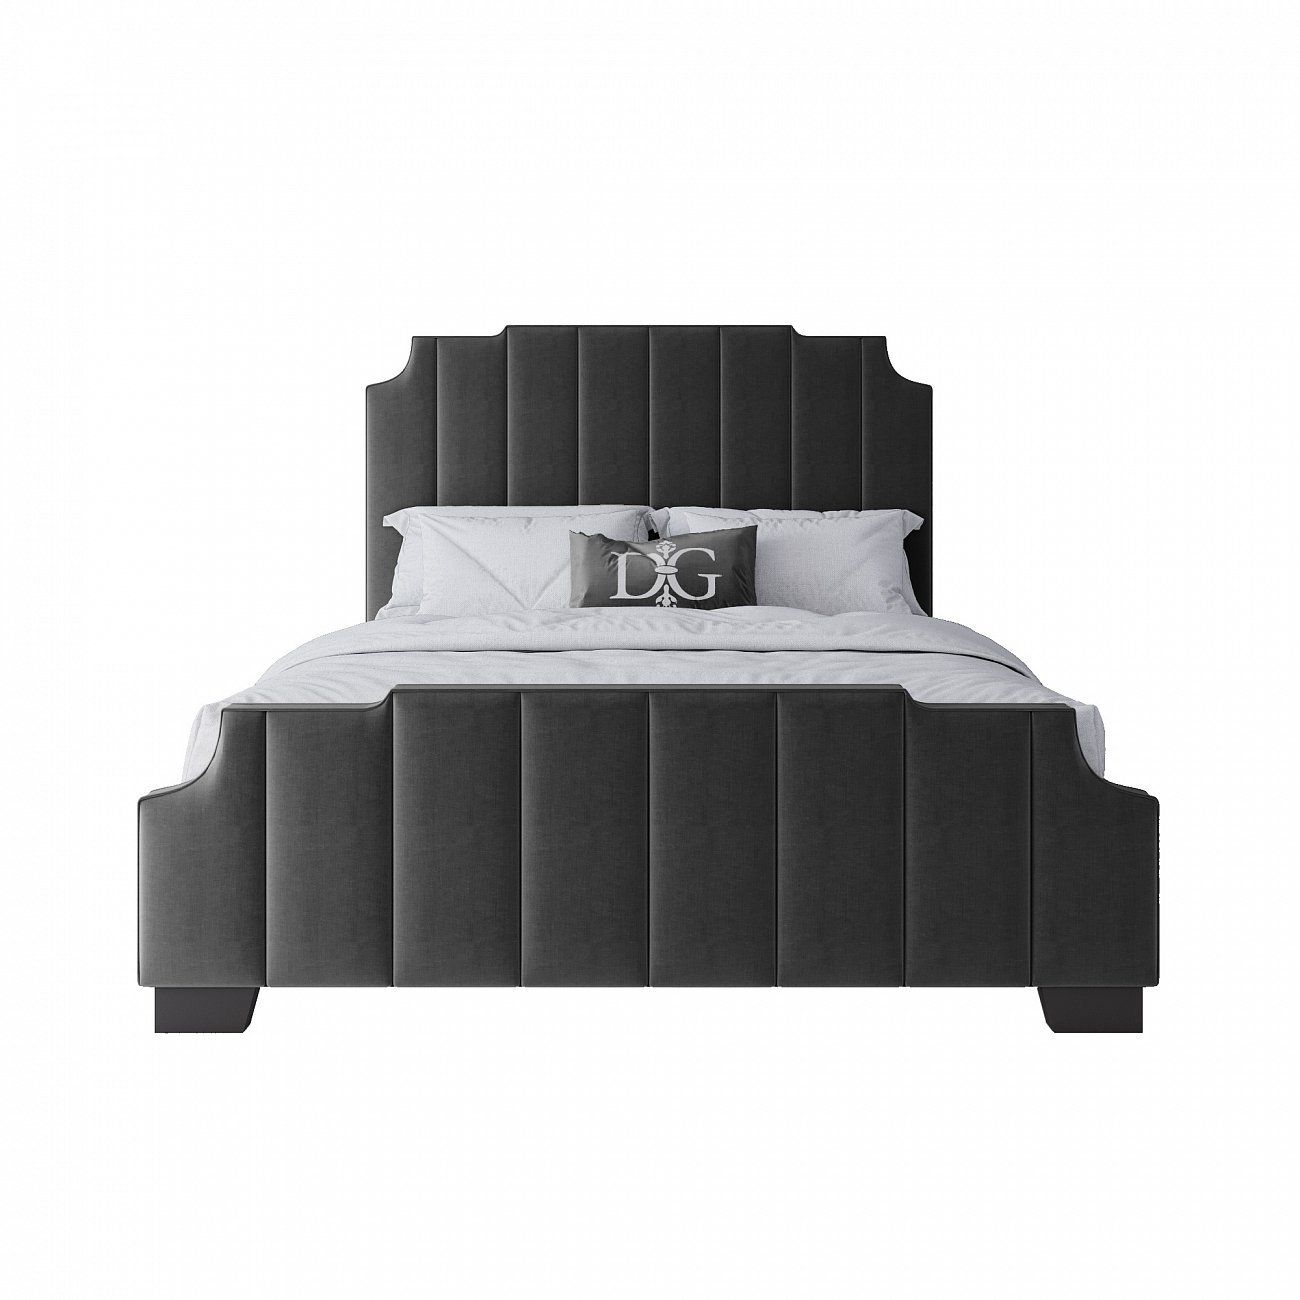 Bony double bed with upholstered headboard 160x200 cm black